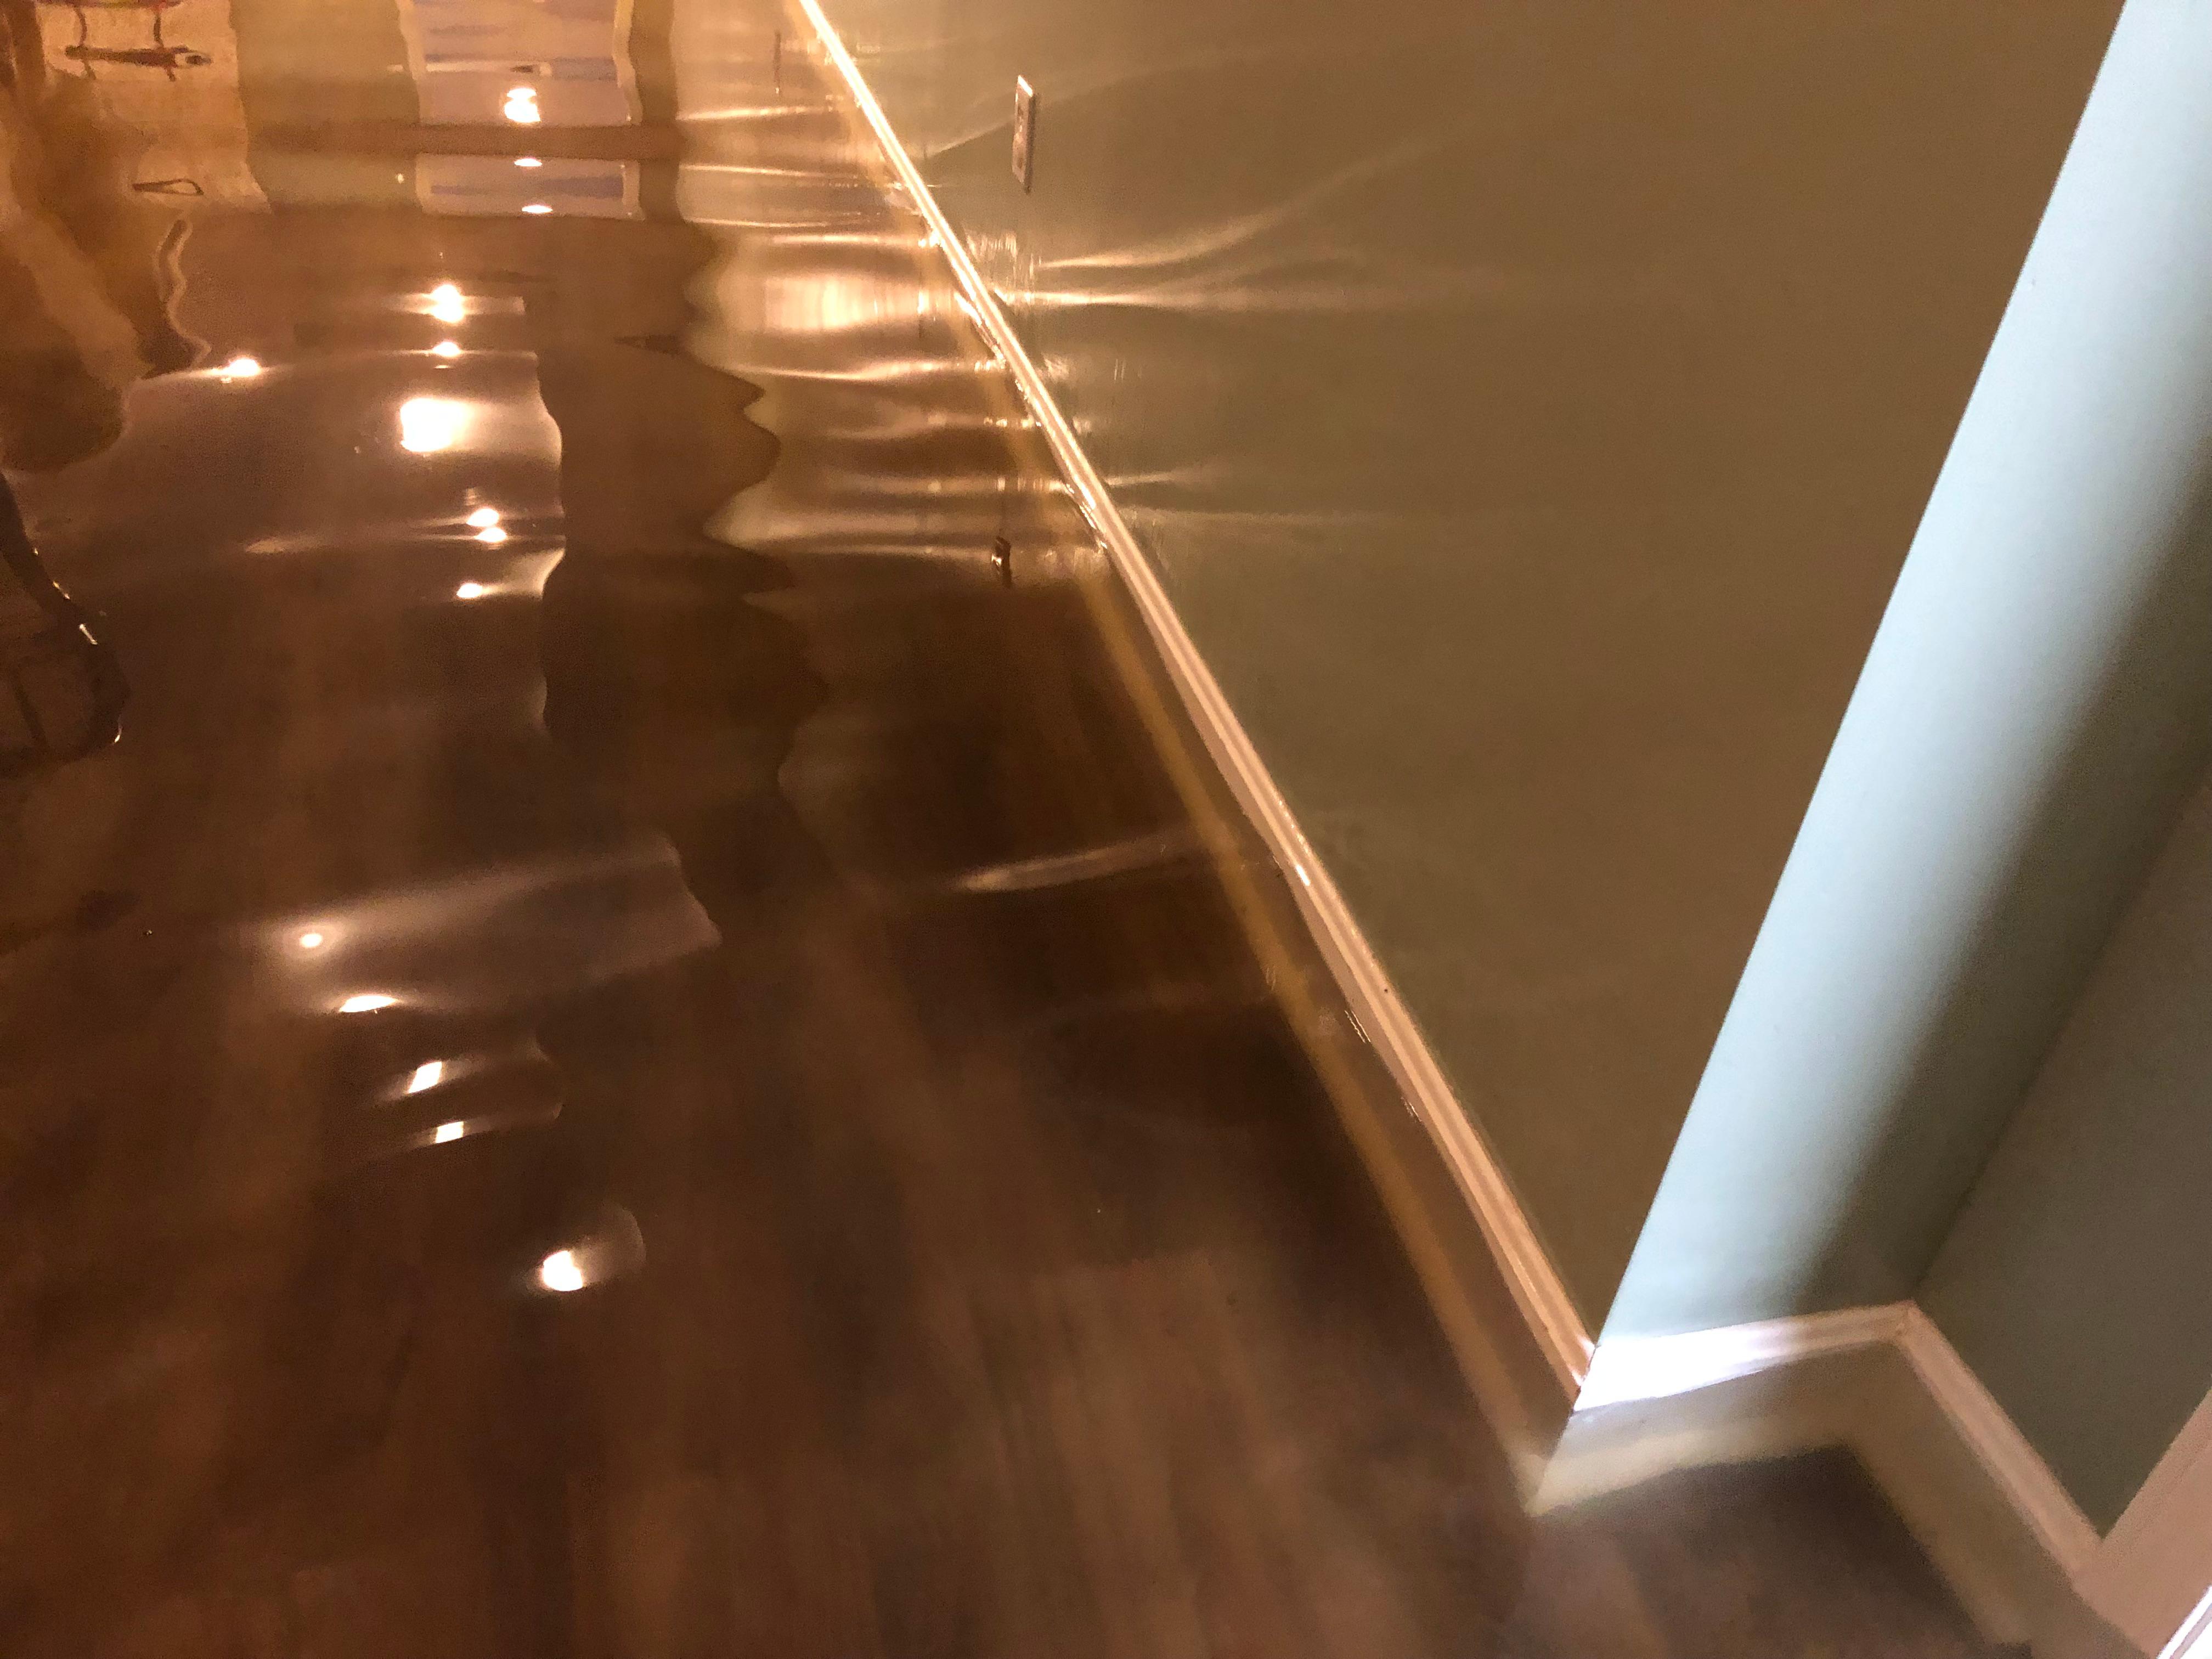 When flood waters invade your home or business, call SERVPRO of Leawood/Clay County for restoration.